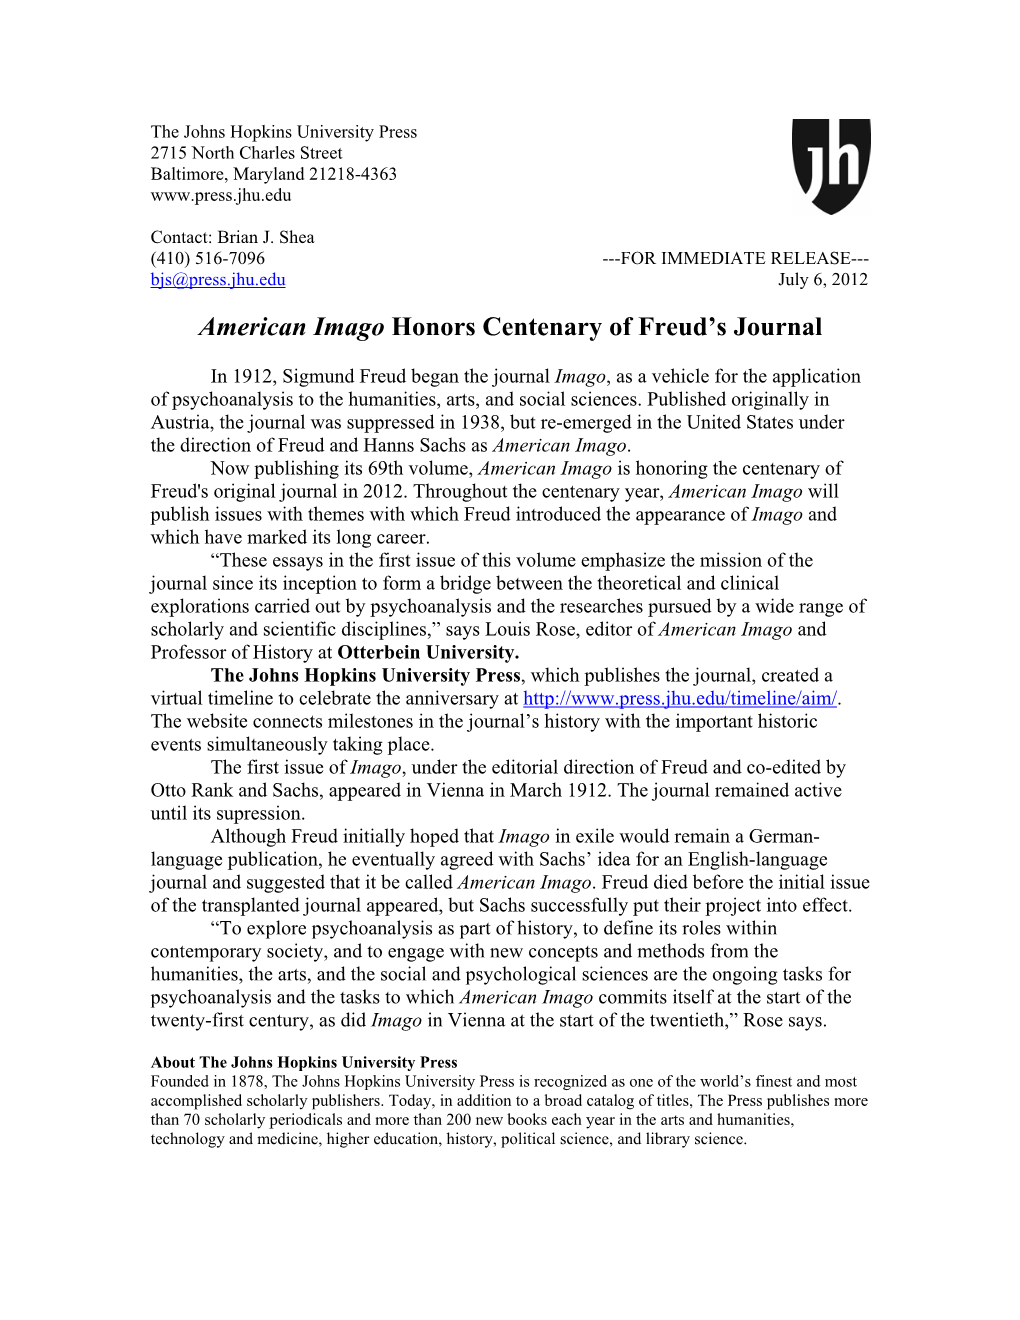 American Imago Honors Centenary of Freud's Journal